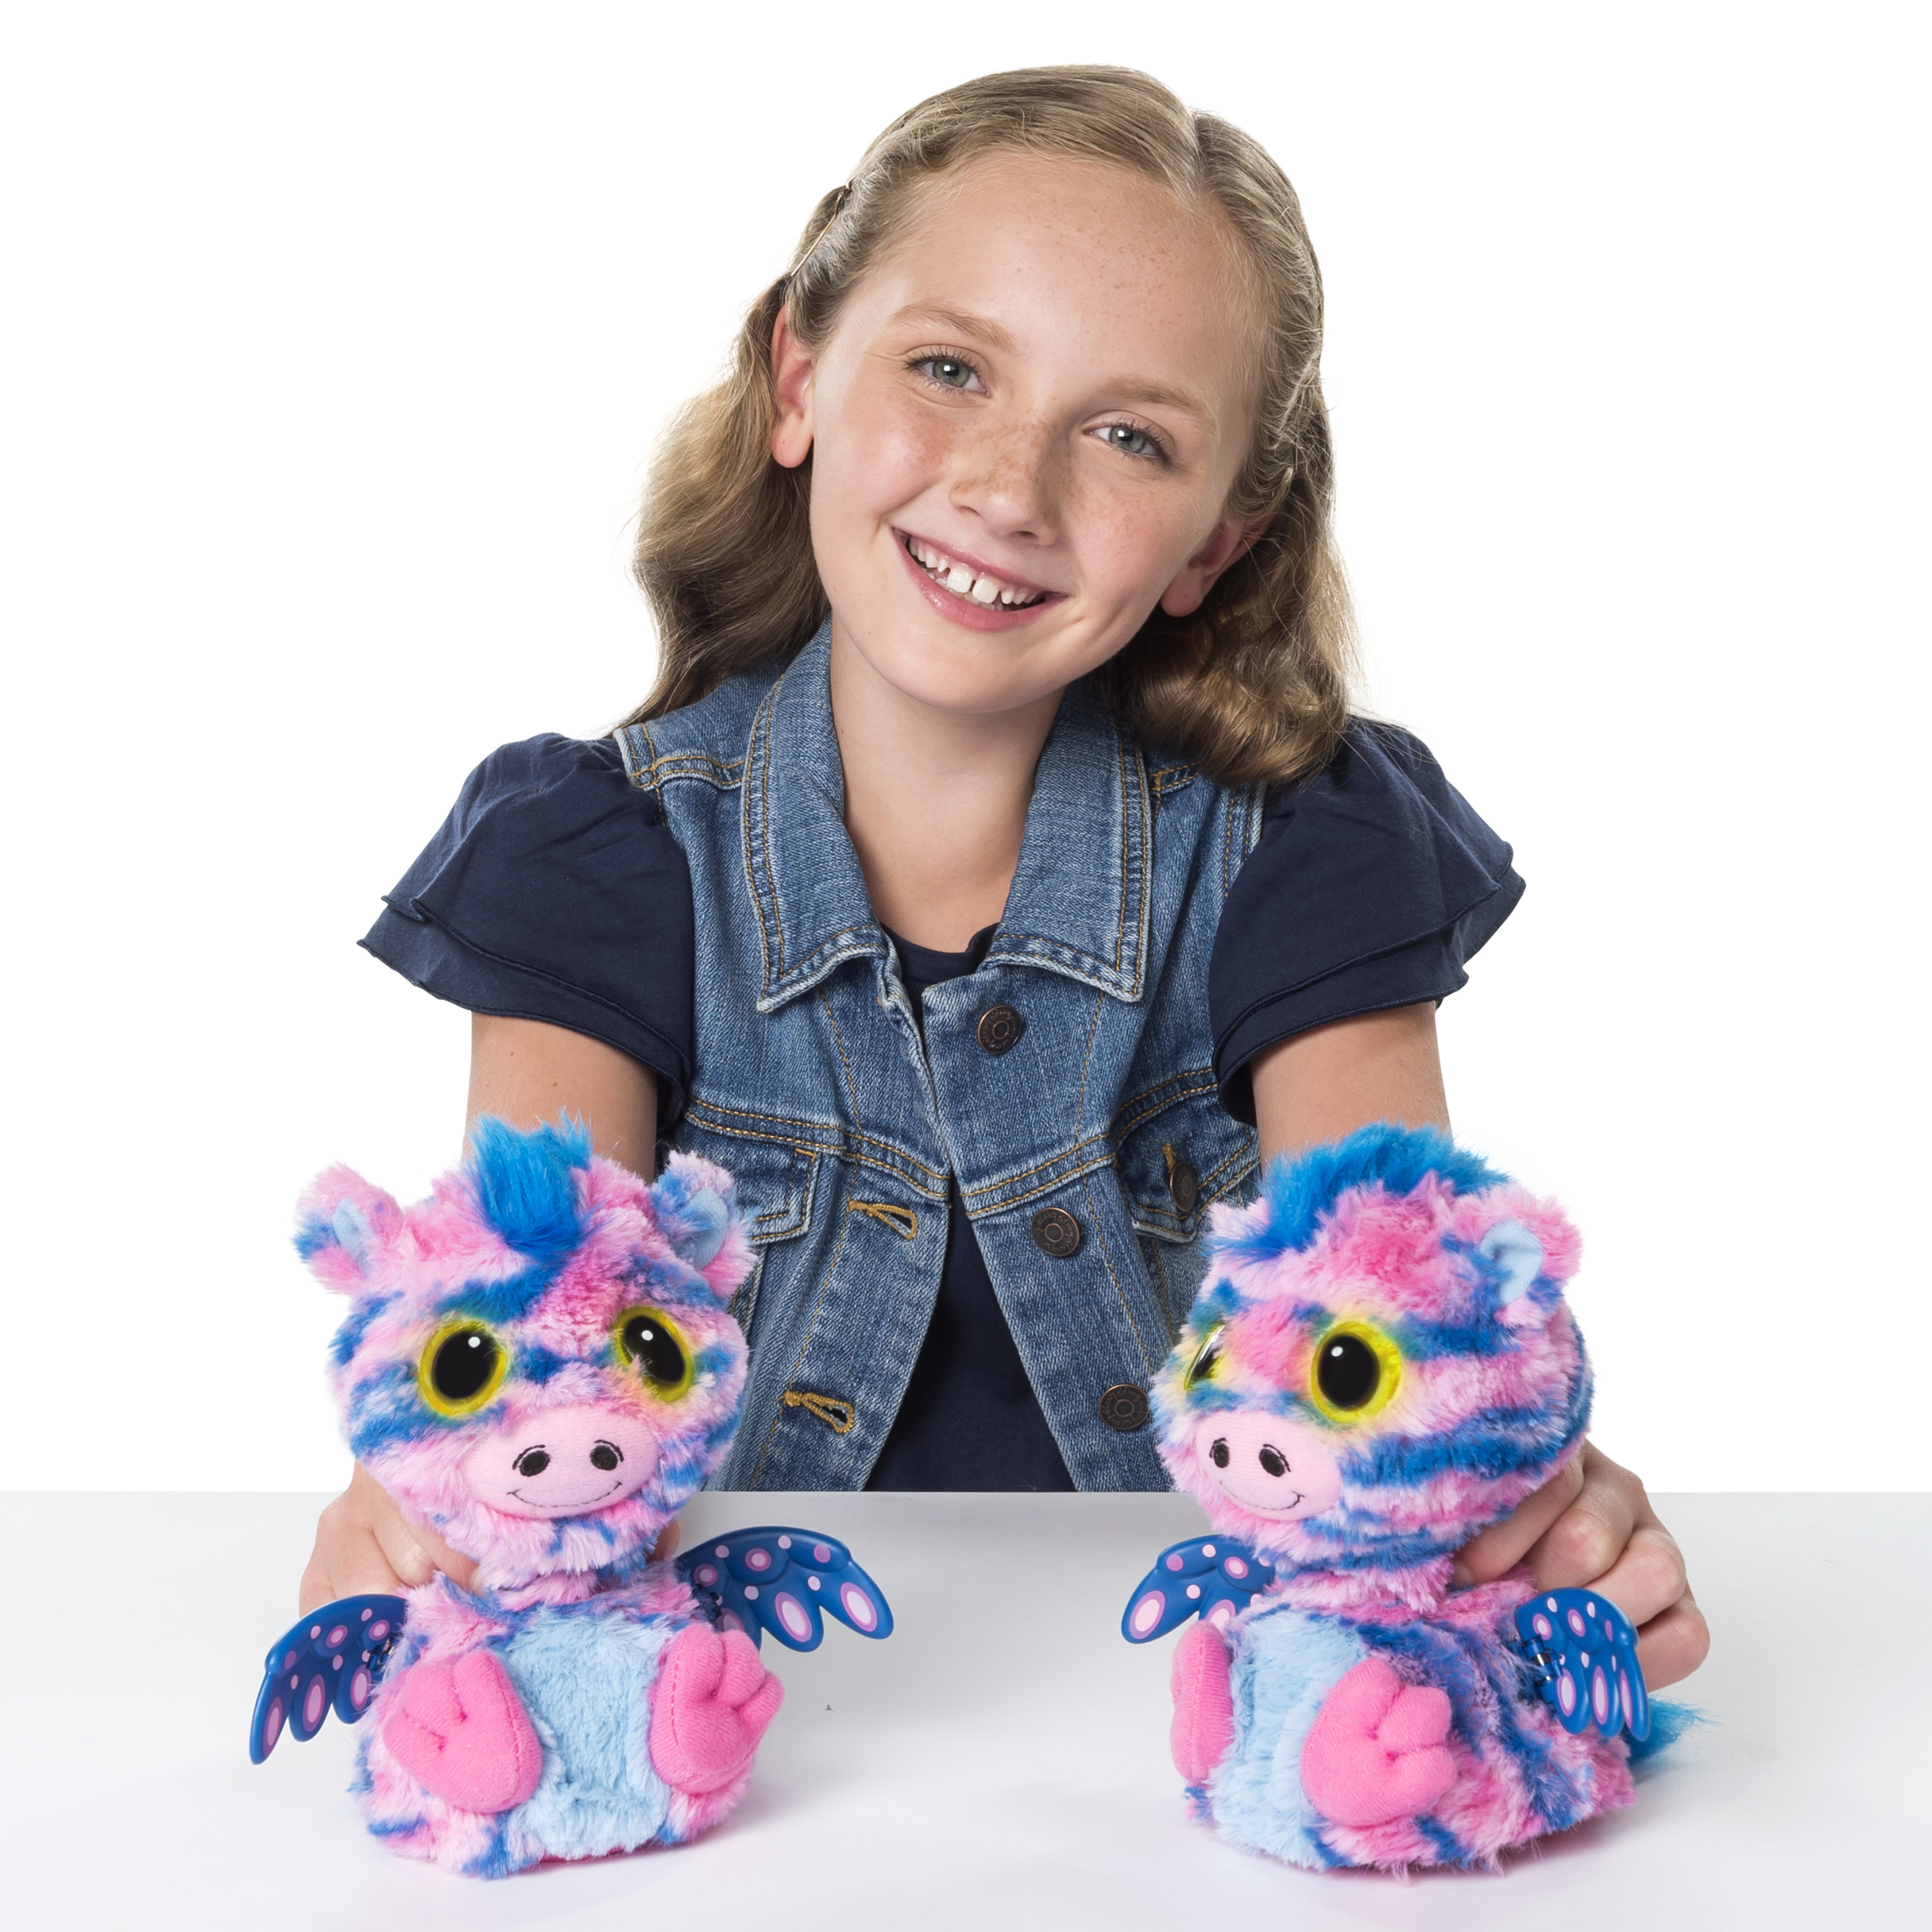 Hatchimals Surprise ? Zuffin ? Hatching Egg with Surprise Twin Interactive Hatchimal Creatures and Bracelet Accessory by Spin Master, Available Exclusively at Walmart - image 5 of 8